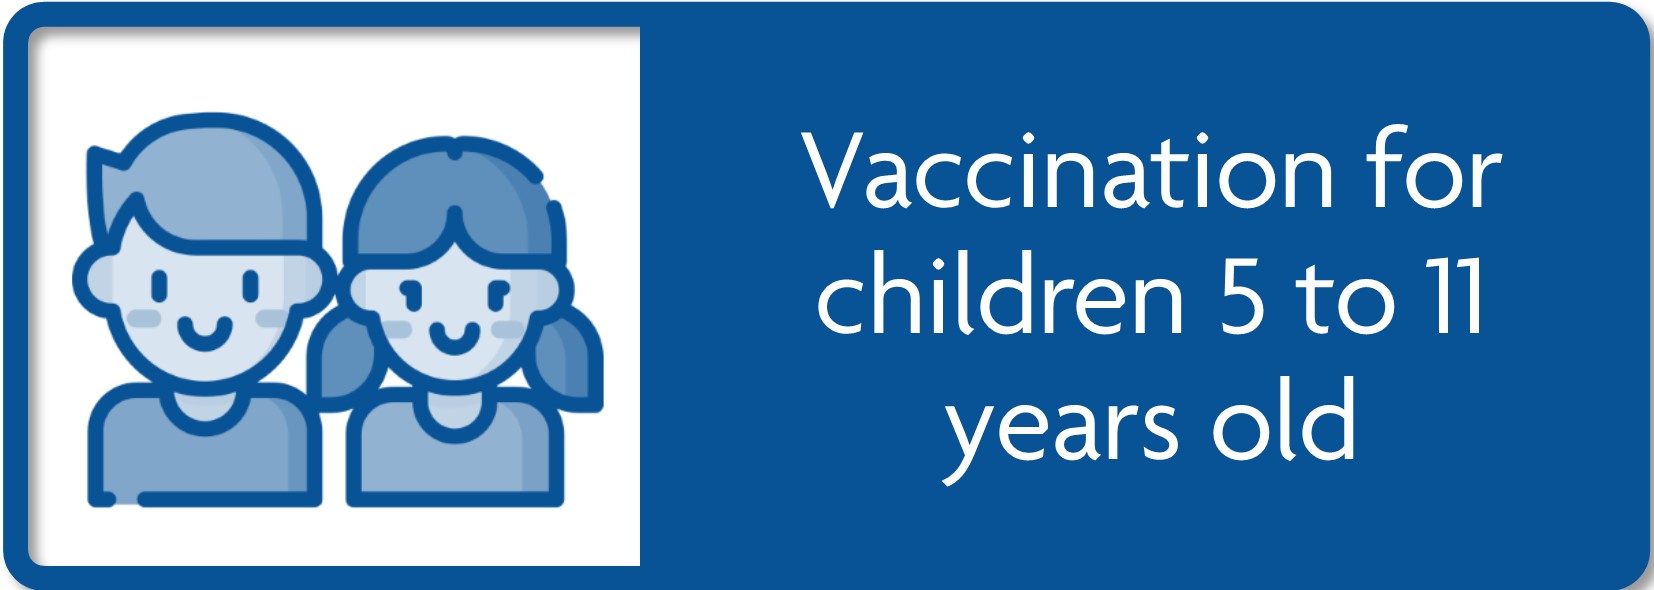 Click to go to Vaccination for children 5 to 11 years old.